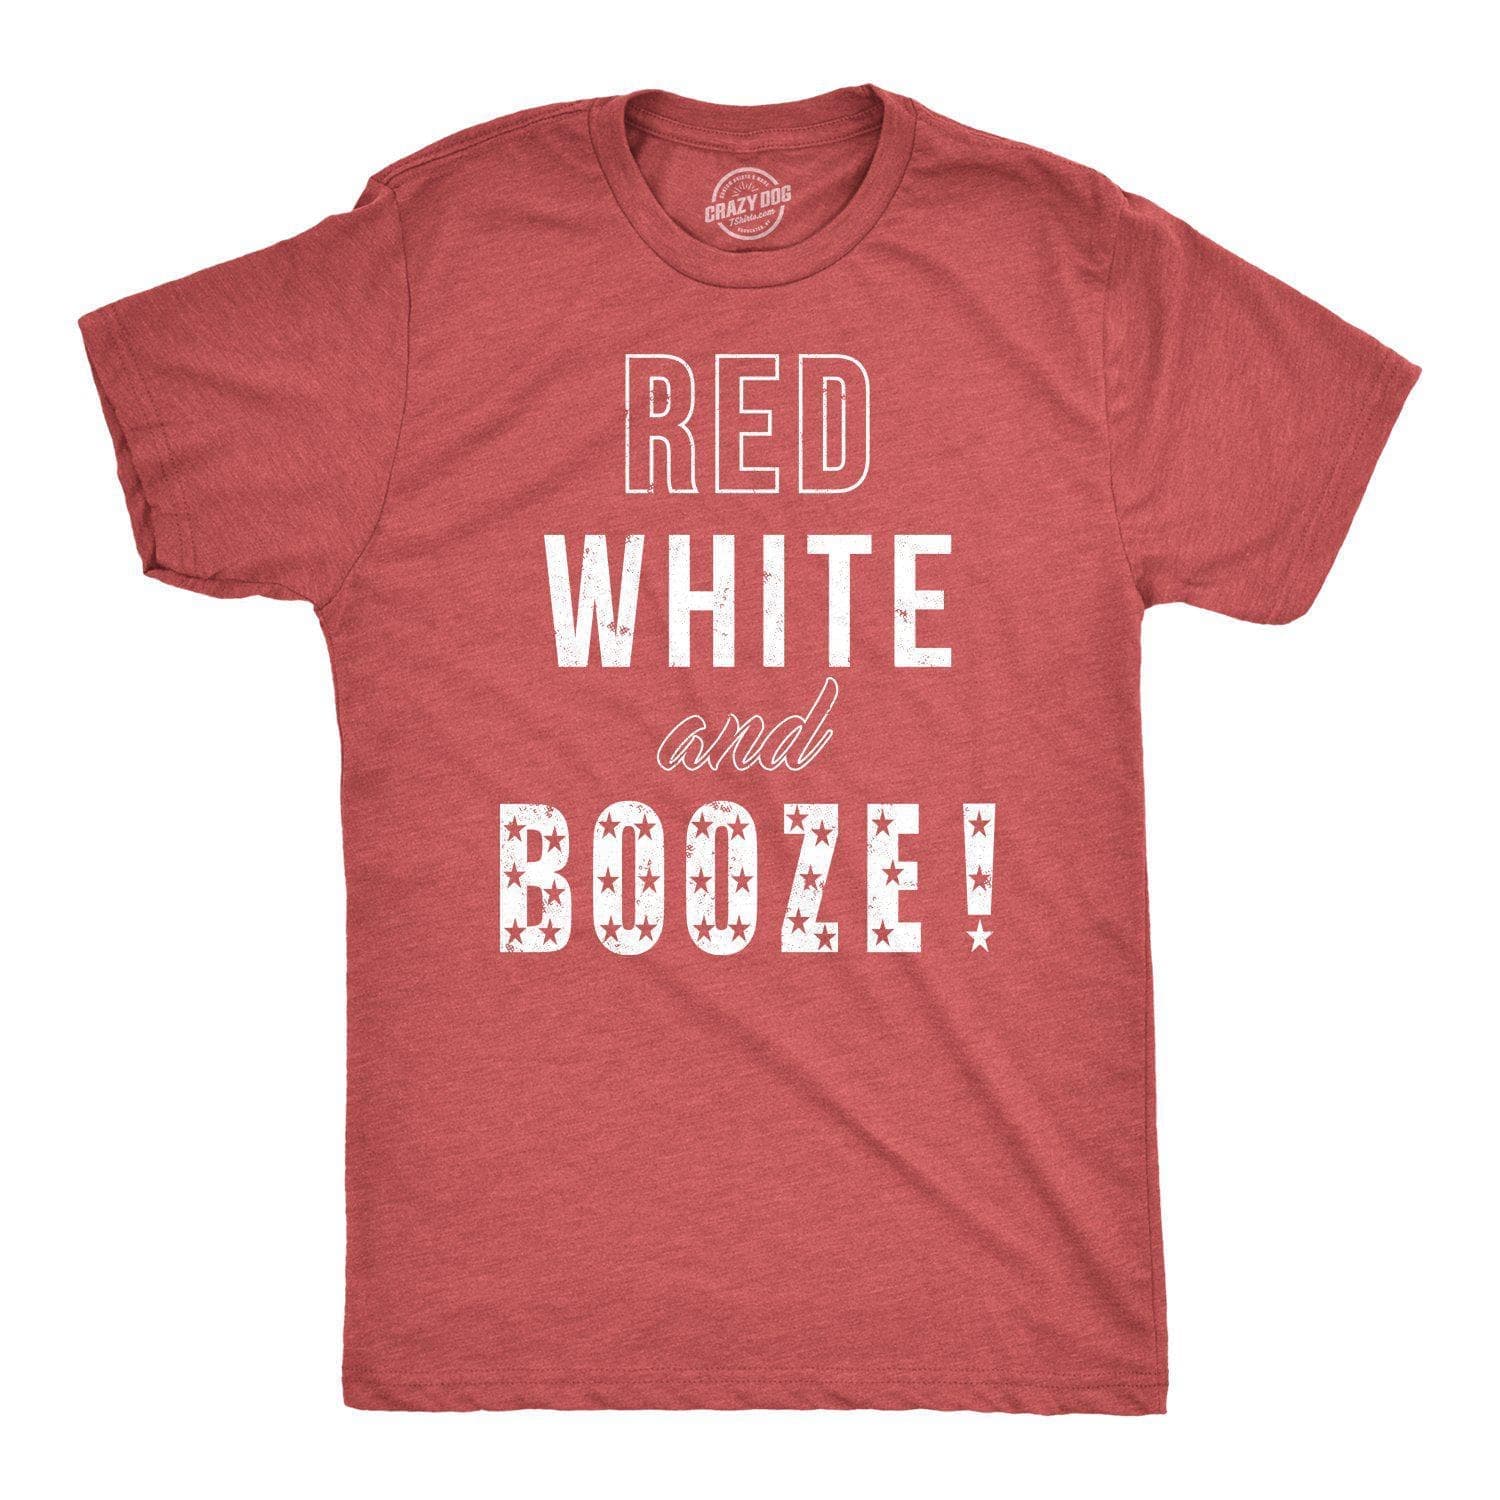 Red White and Booze Men's Tshirt - Crazy Dog T-Shirts